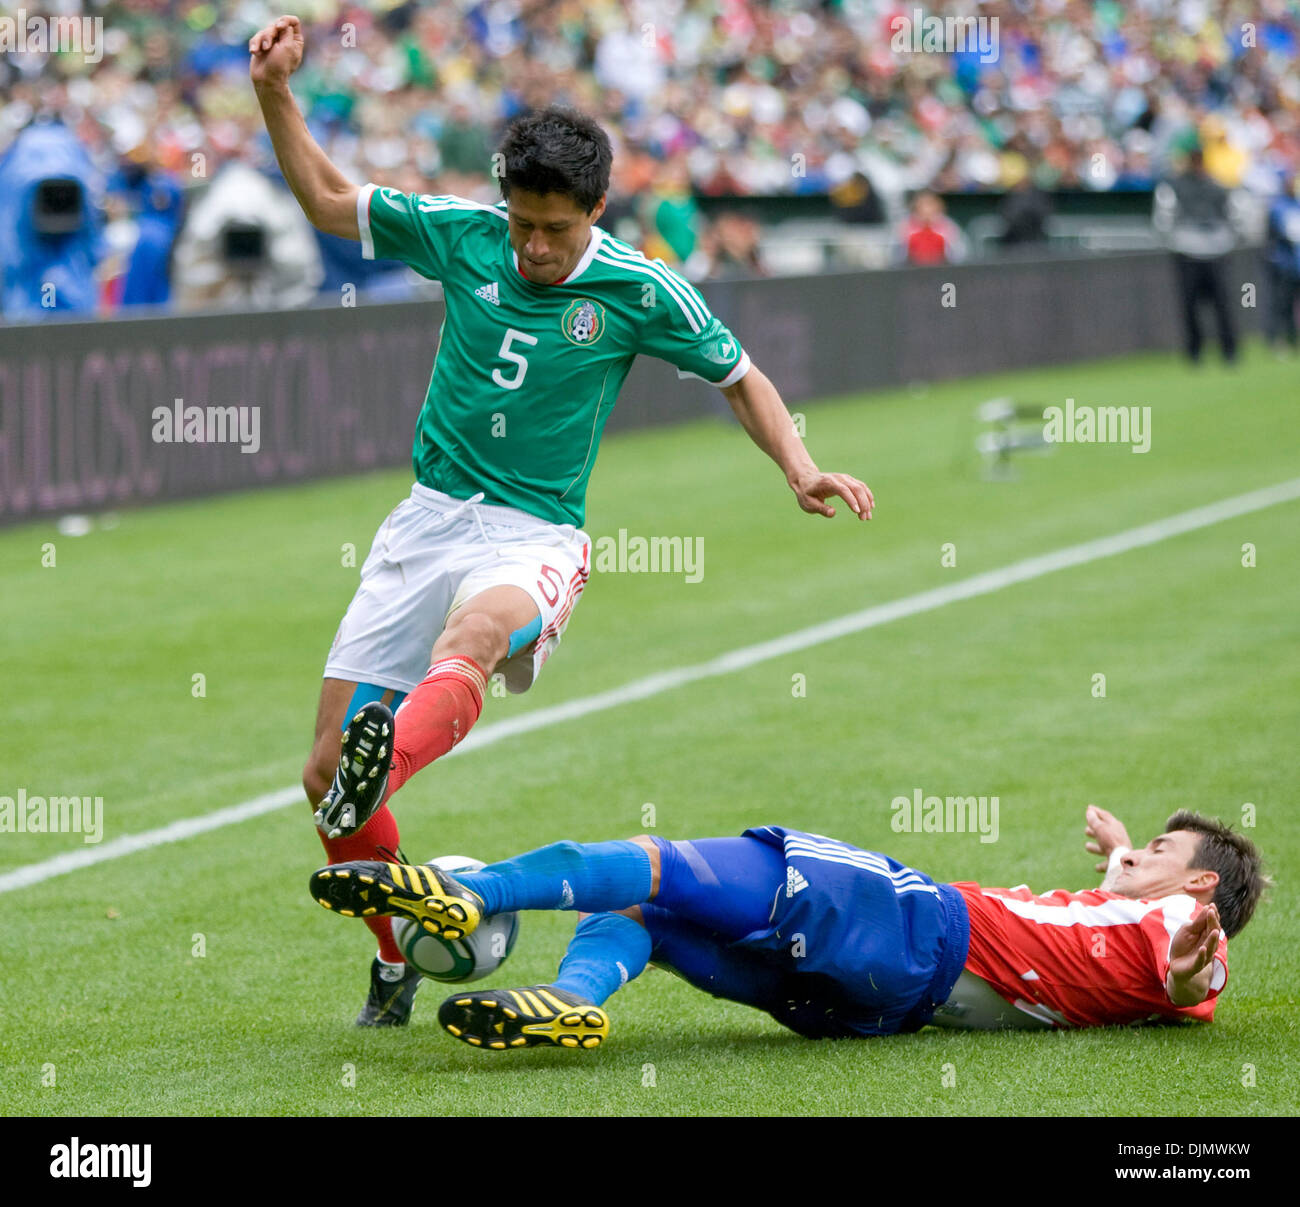 Sept. 12, 2010 - Oakland, California, U.S. - Defender RICARDO OSORIO #5 tries to maintain control of the ball during the FIFA friendly match between Mexico and Paraguay. (Credit Image: © William Mancebo/ZUMAPRESS.com) Stock Photo